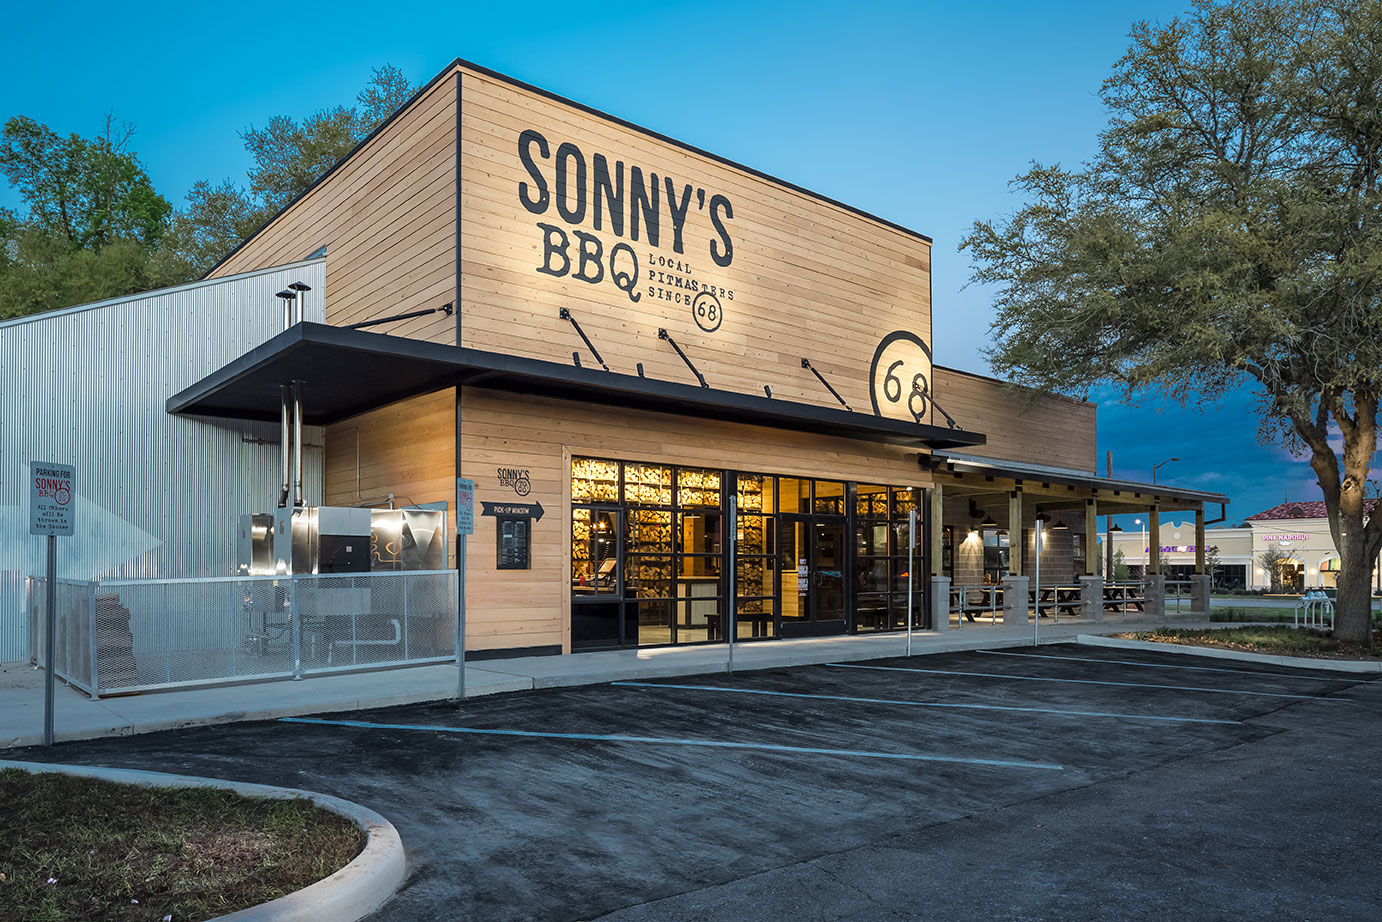 About Us | Sonny's BBQ